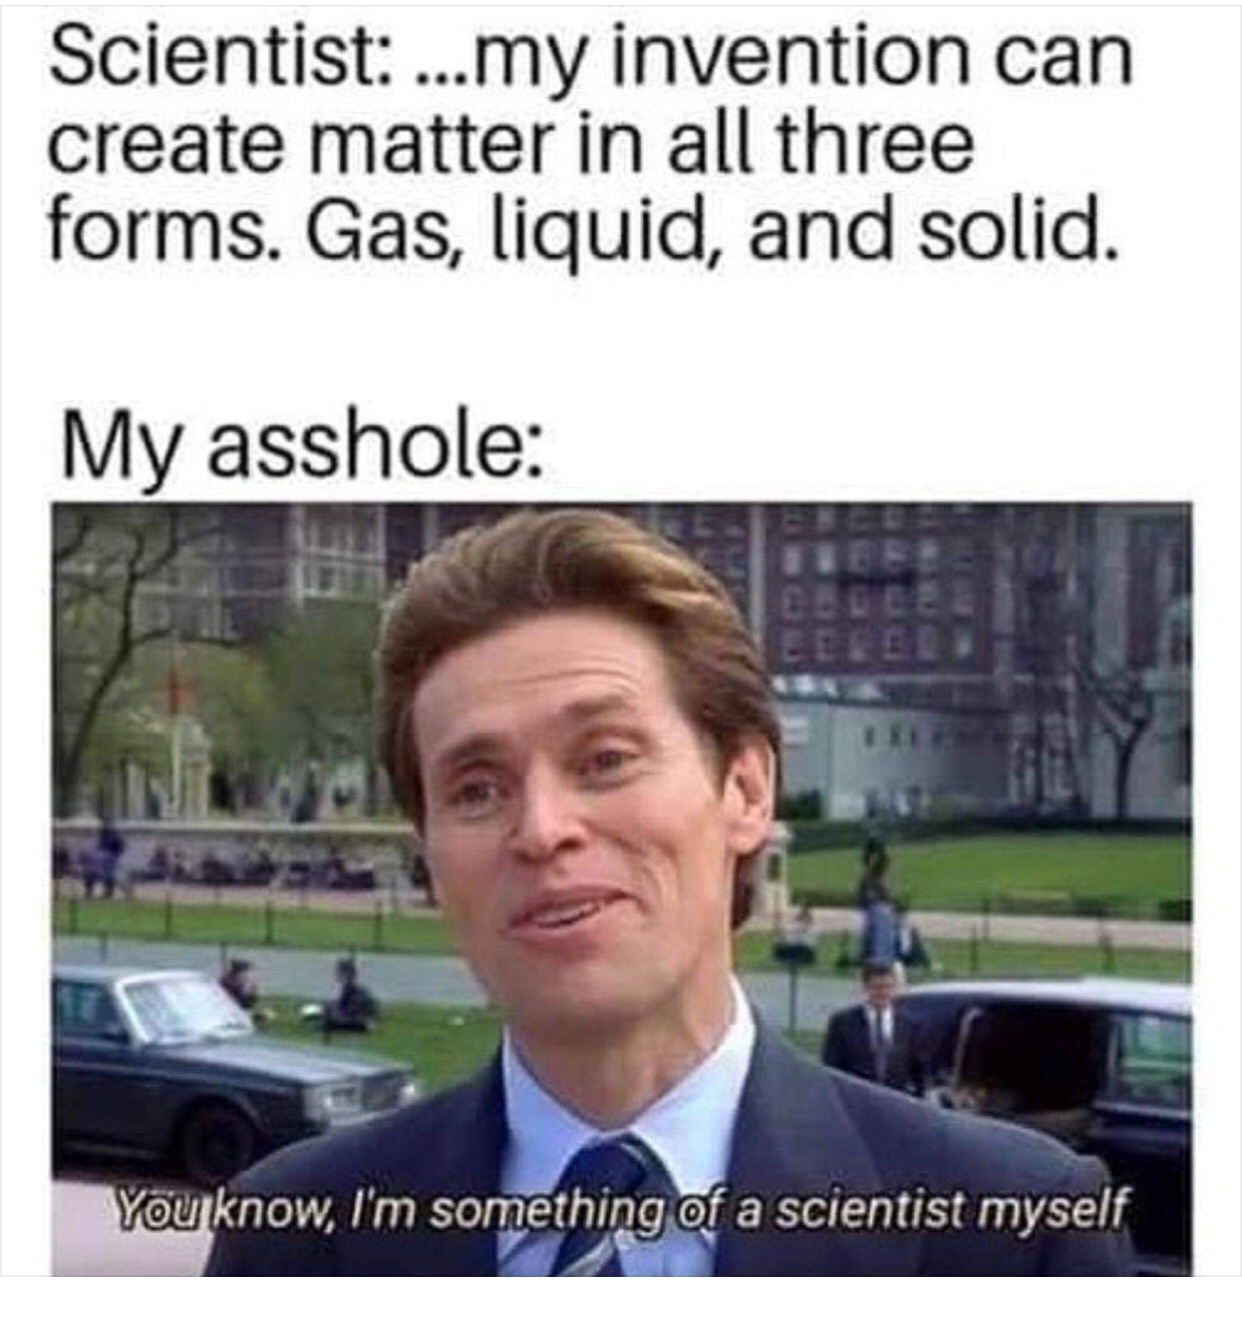 time to make a new door meme - Scientist ...my invention can create matter in all three forms. Gas, liquid, and solid. My asshole You know, I'm something of a scientist myself